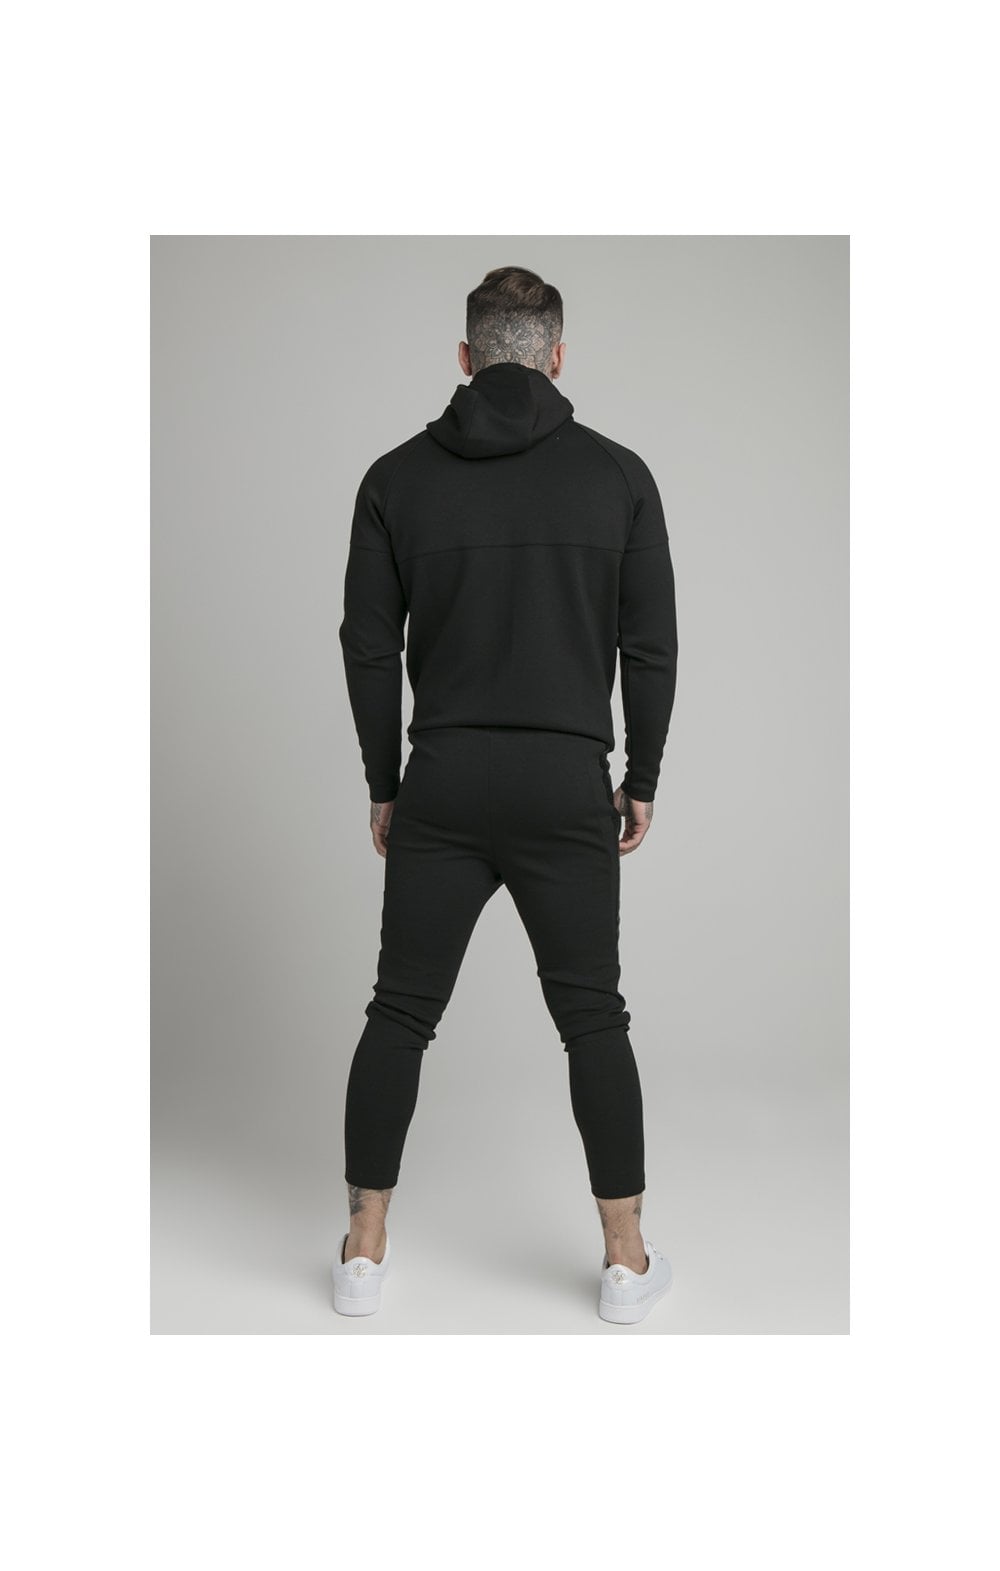 Black Motion Tape Zip Through Hoodie And Jogger Set (10)